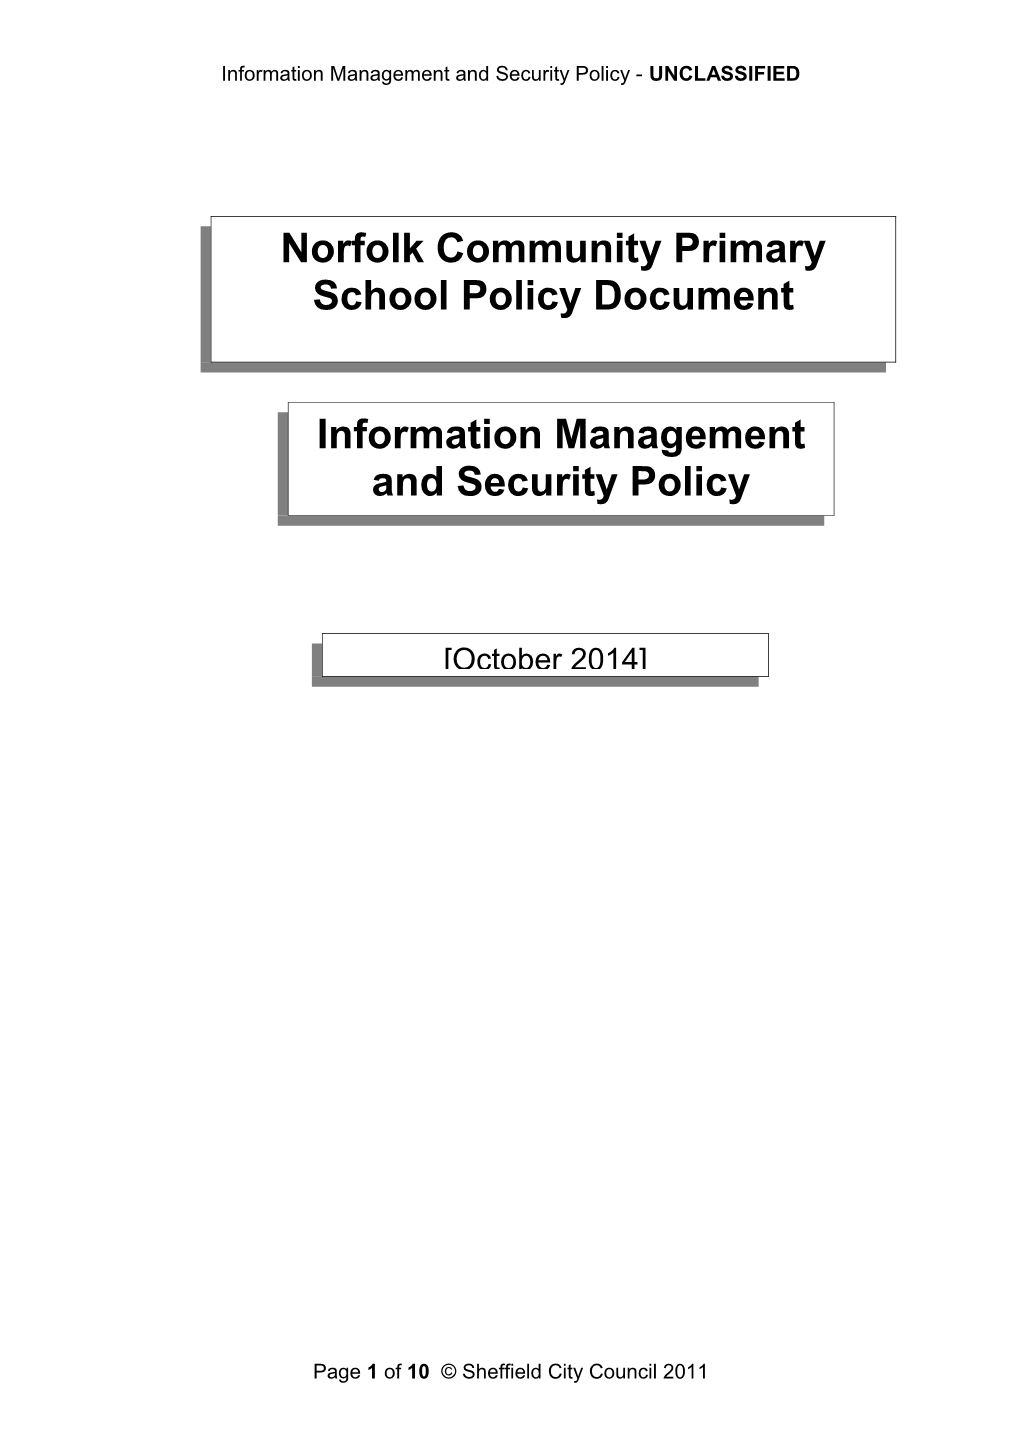 NPCP Information Management and Security Policy